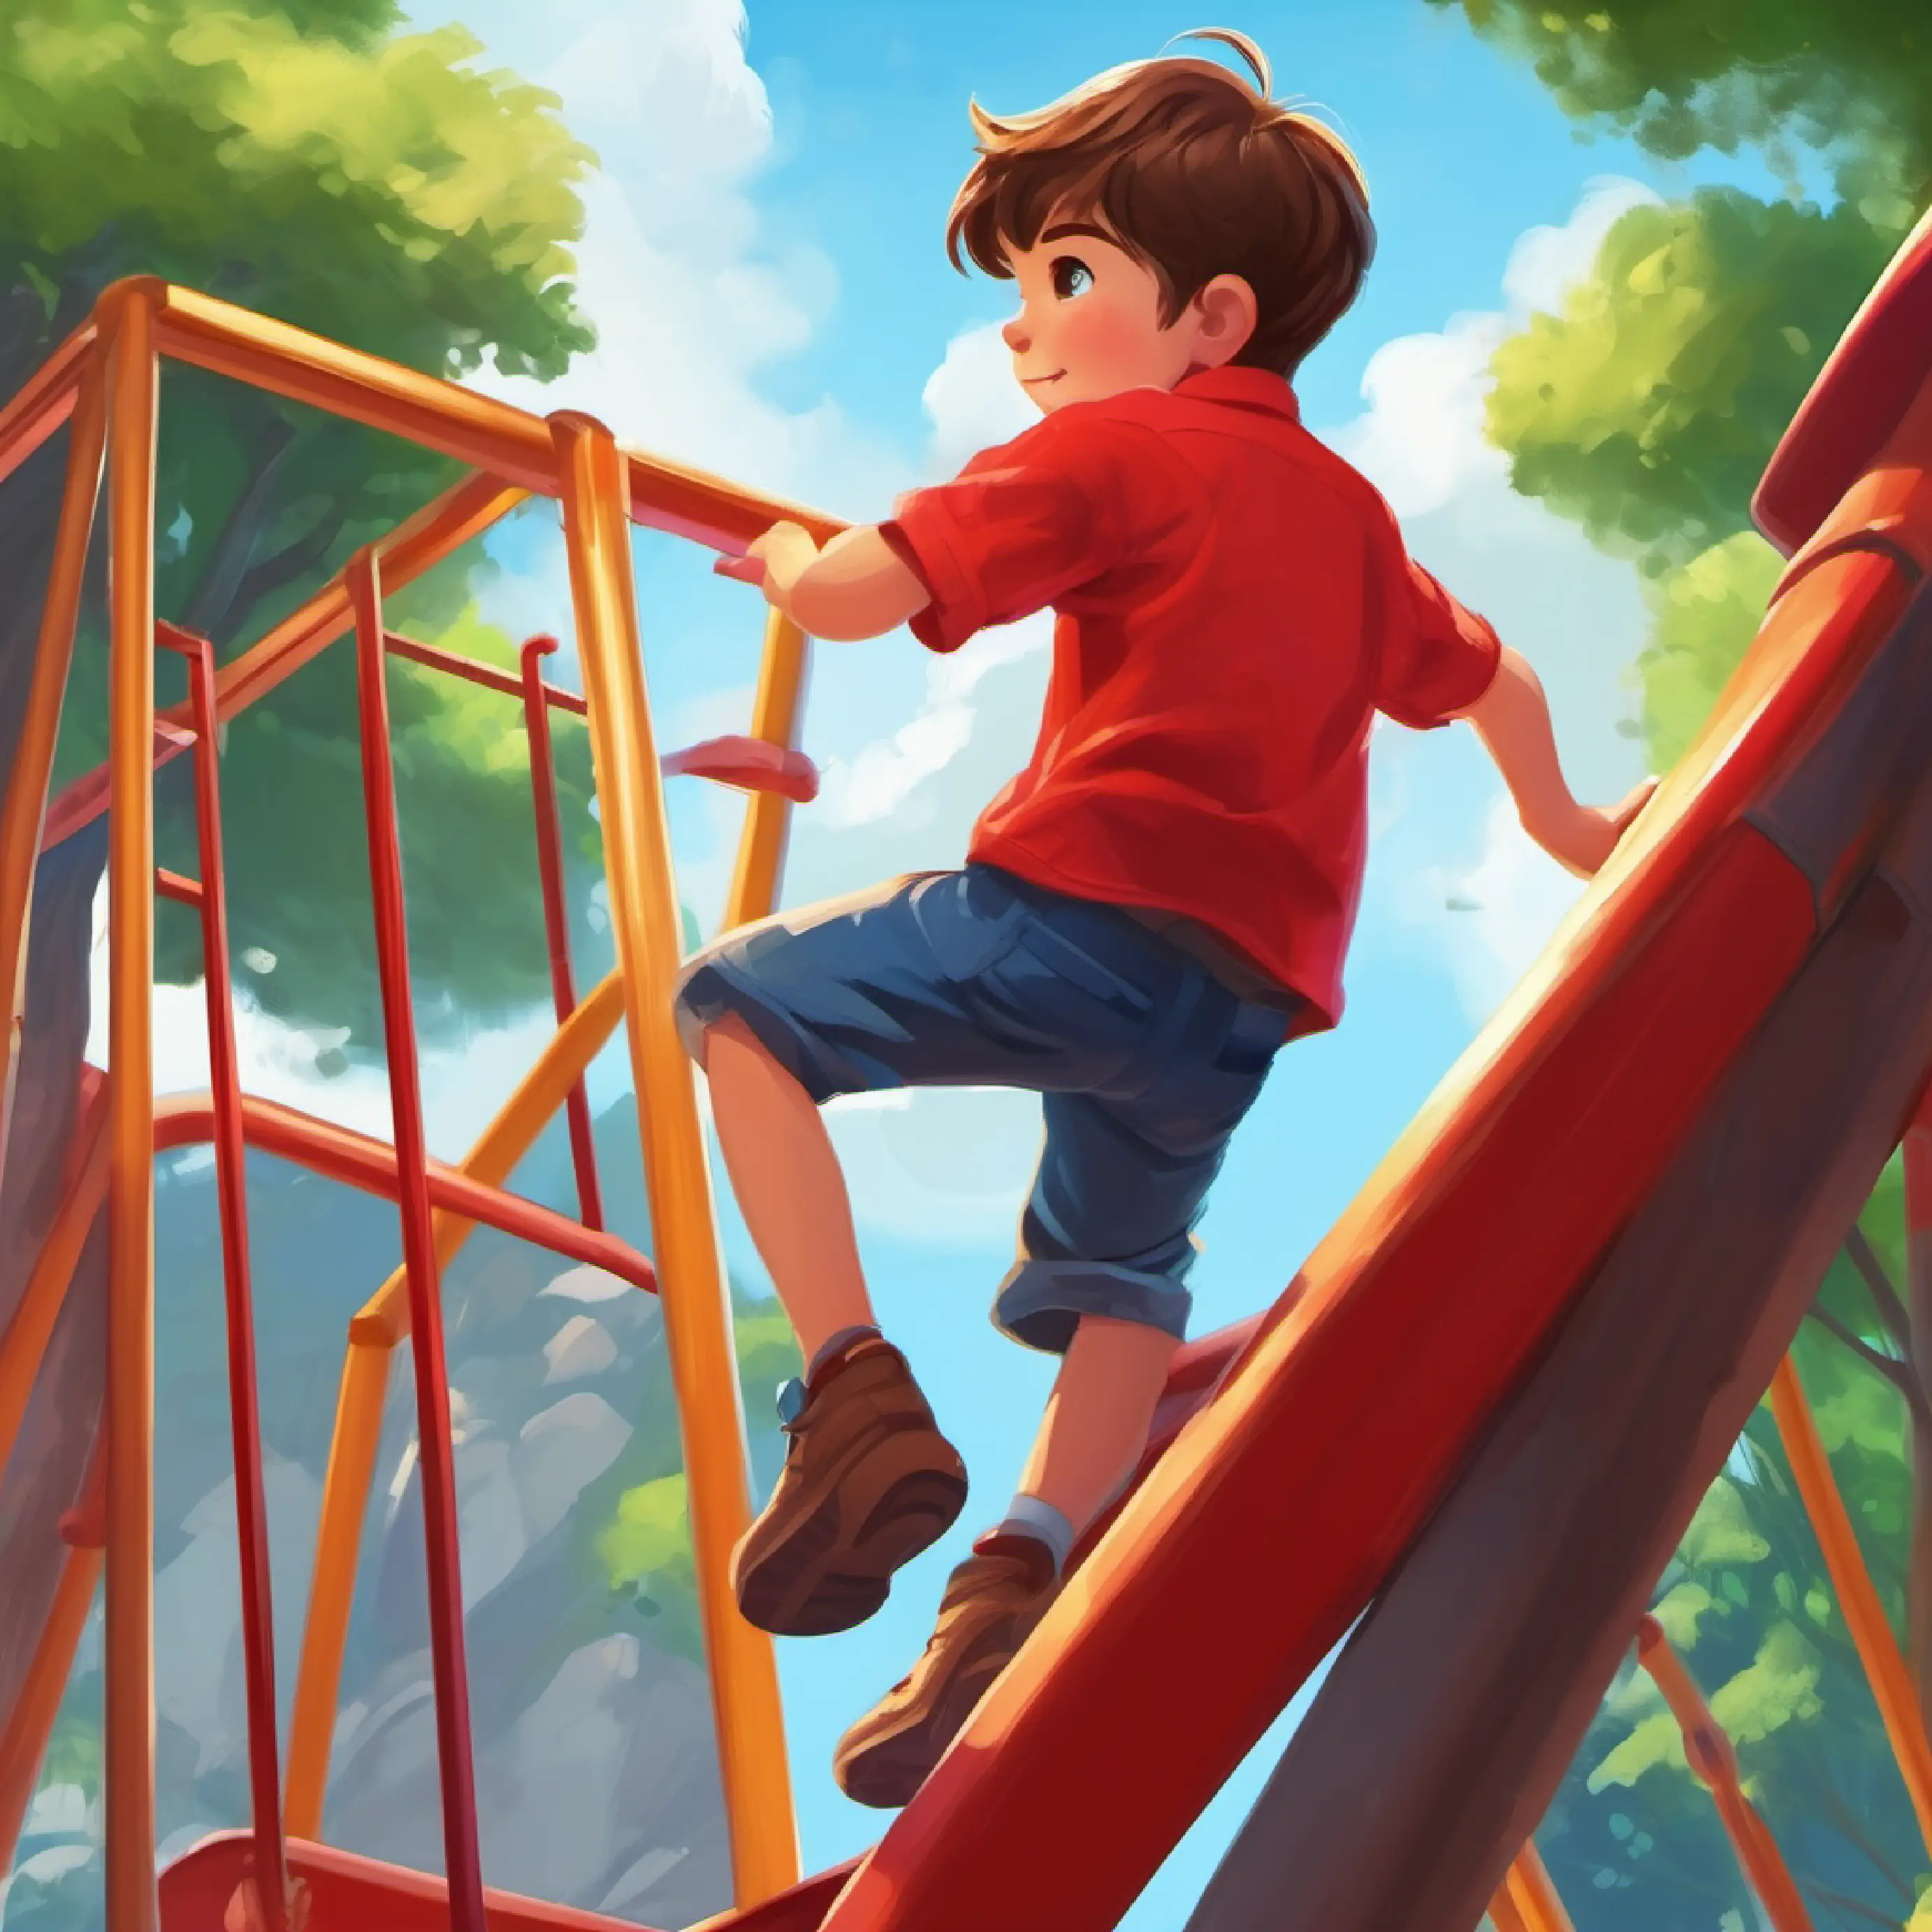 Young boy, short brown hair, bright blue eyes, wearing a red shirt climbs higher and the playground appears small.